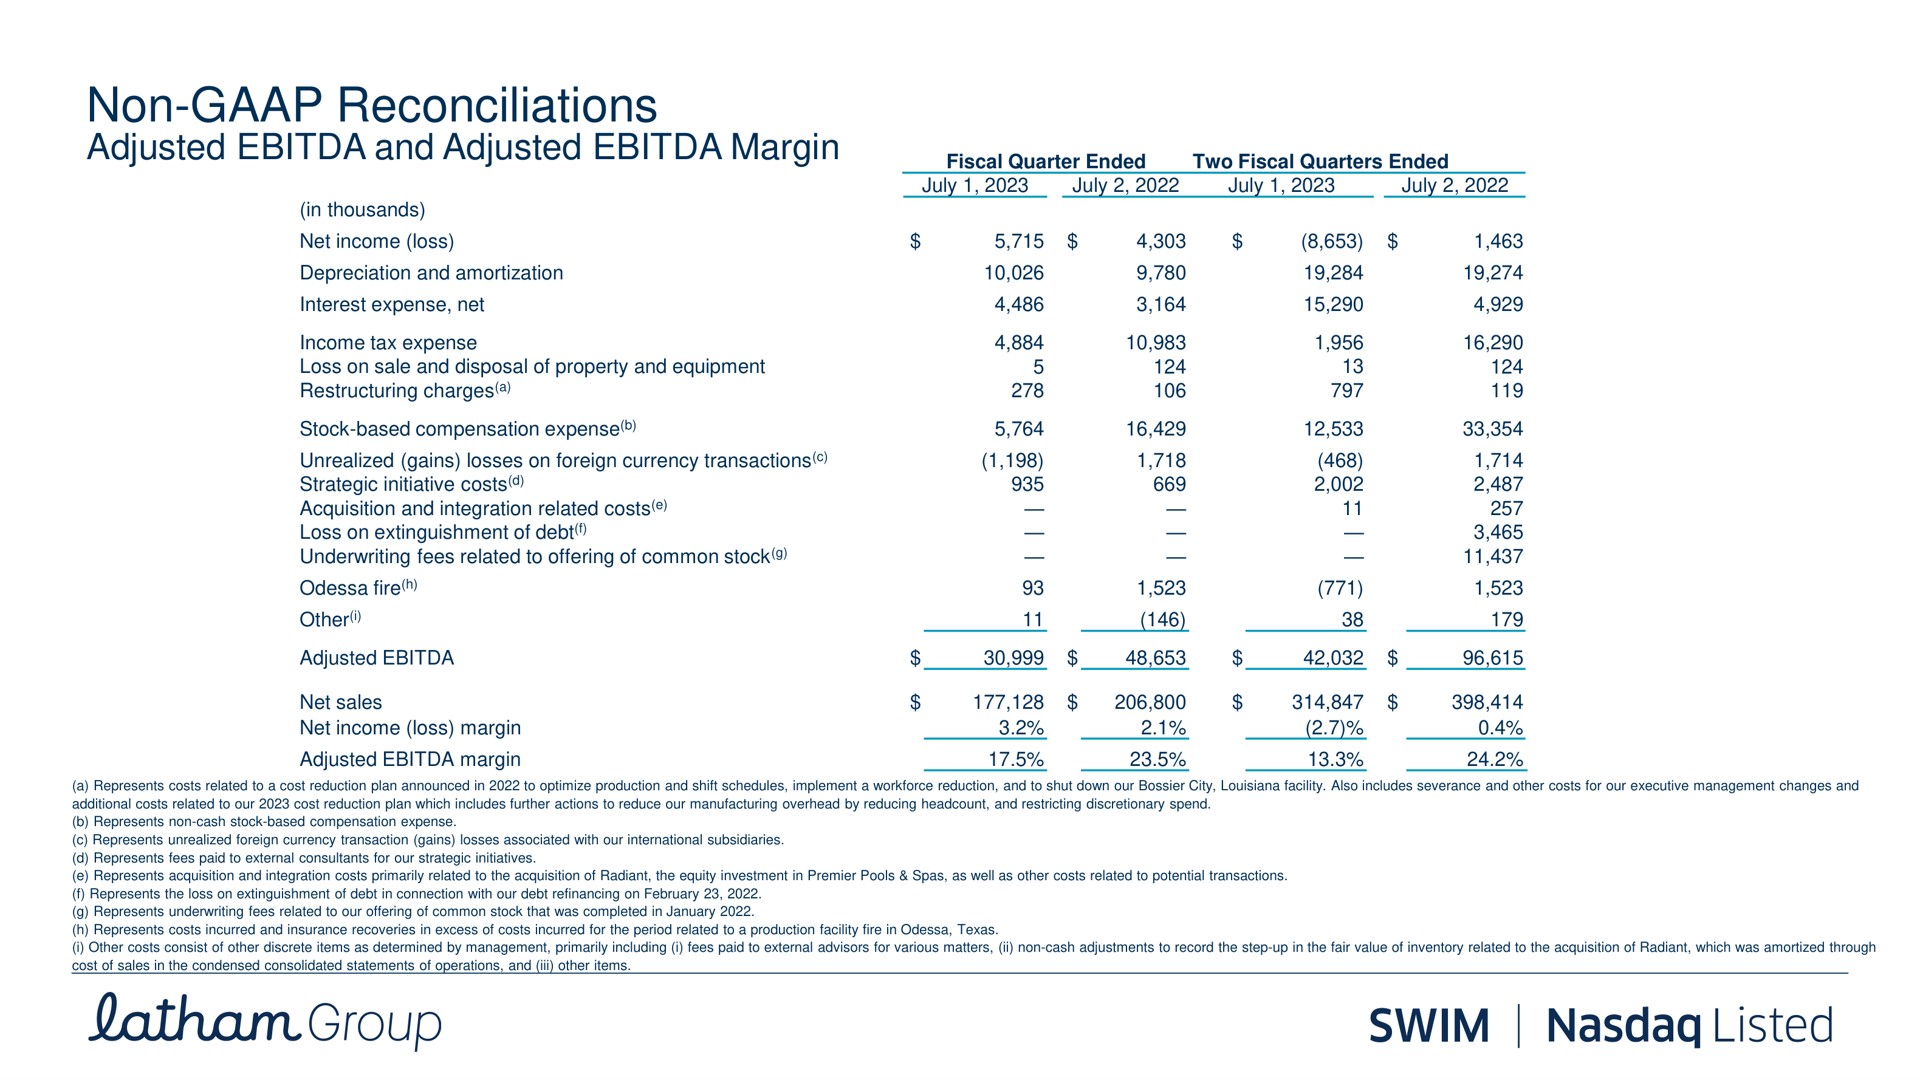 non reconciliations adjusted and adjusted margin group swim listed | Latham Pool Company